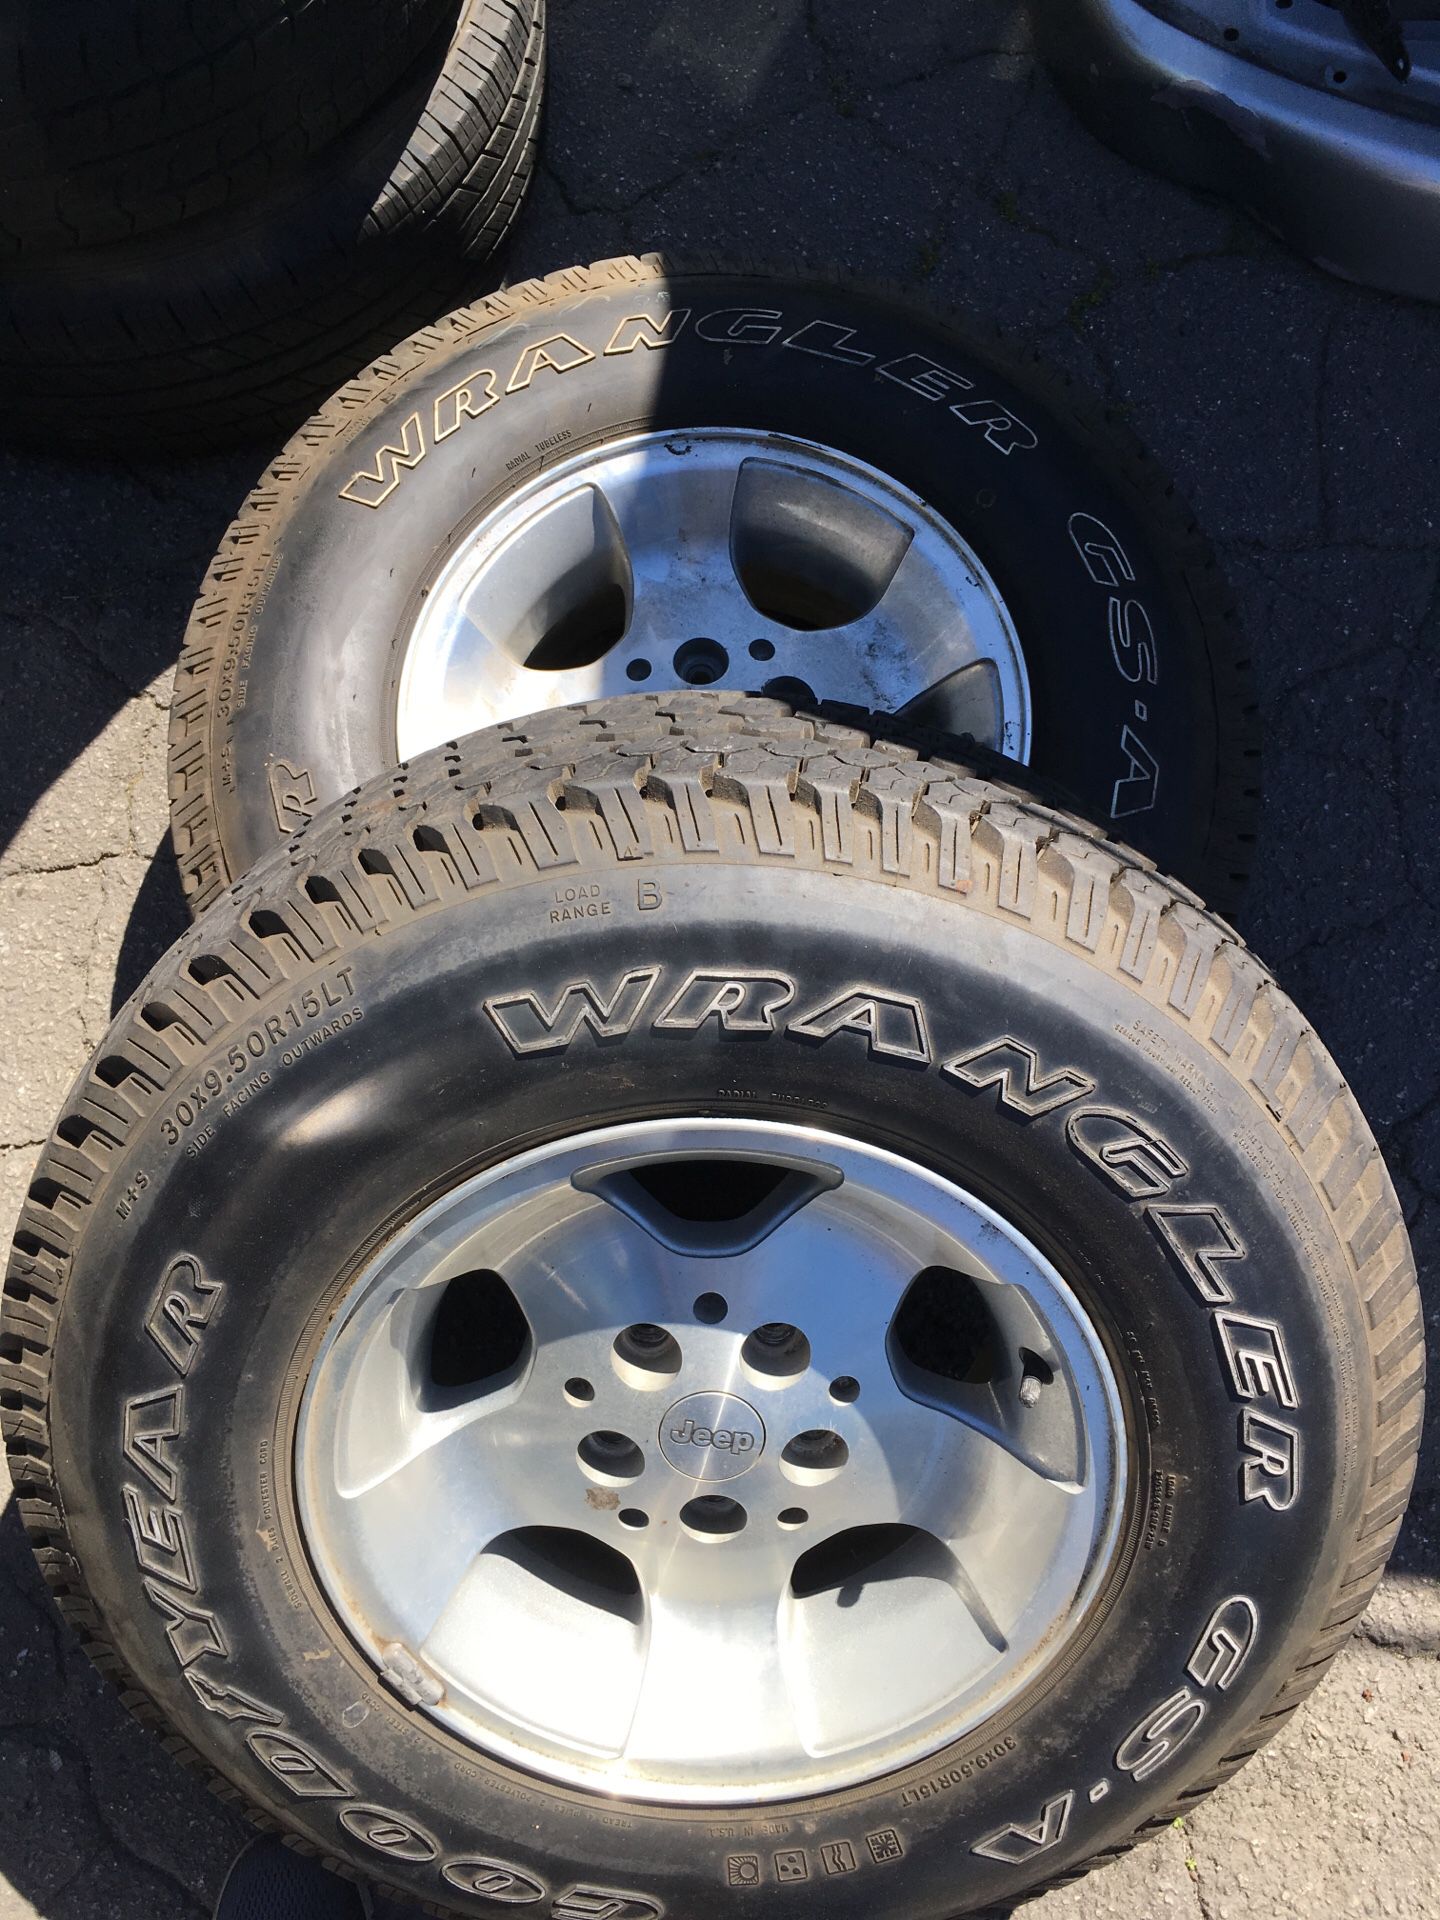 Goodyear Wrangler GS-A  for Sale in Glendale, CA - OfferUp